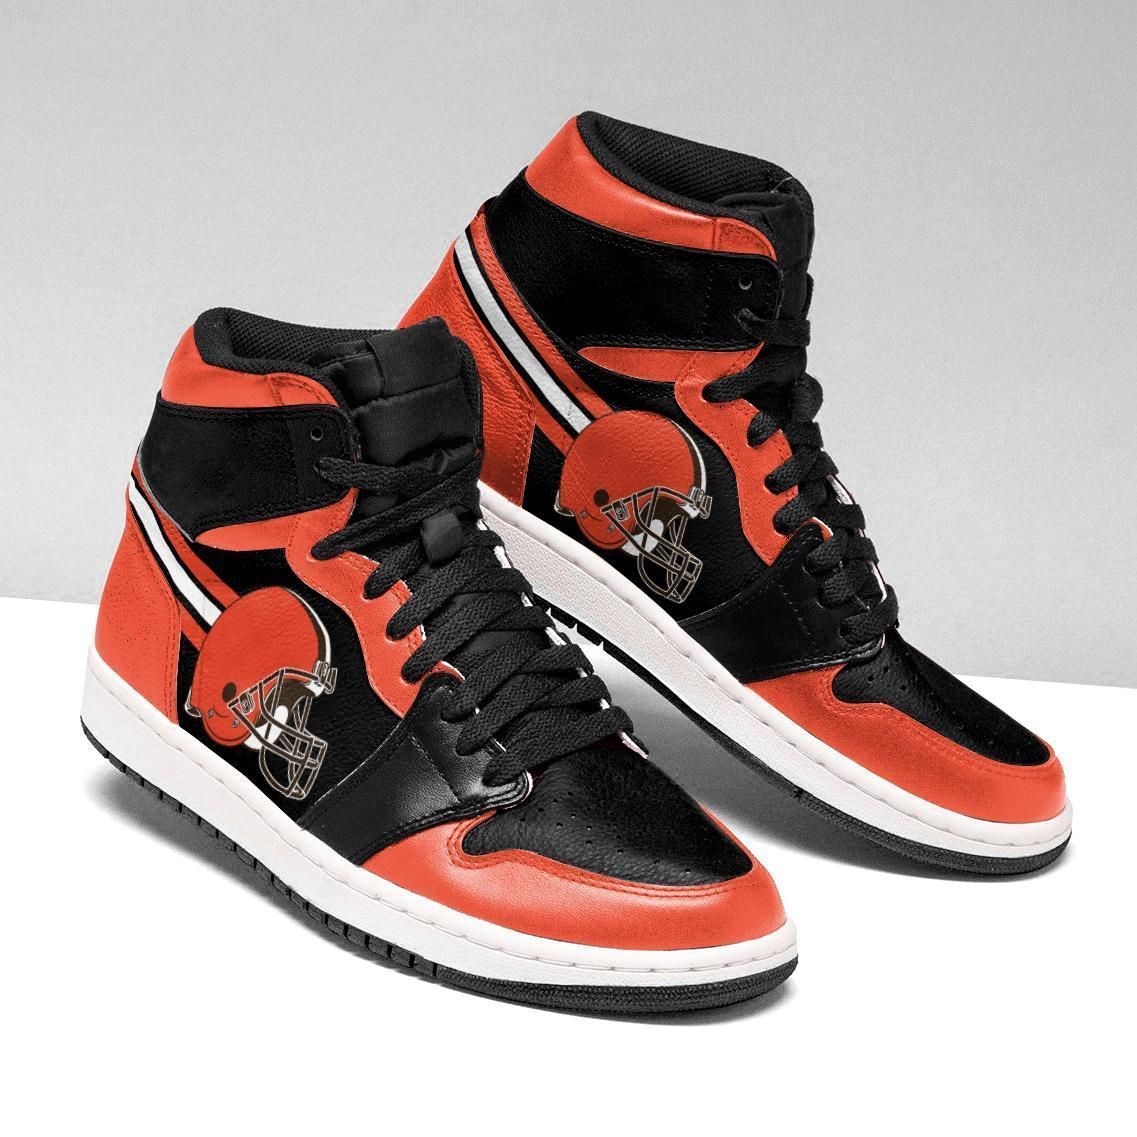 Cleveland Browns NFL Team Sneakers 2021 White/Black Sneaker Boots ...